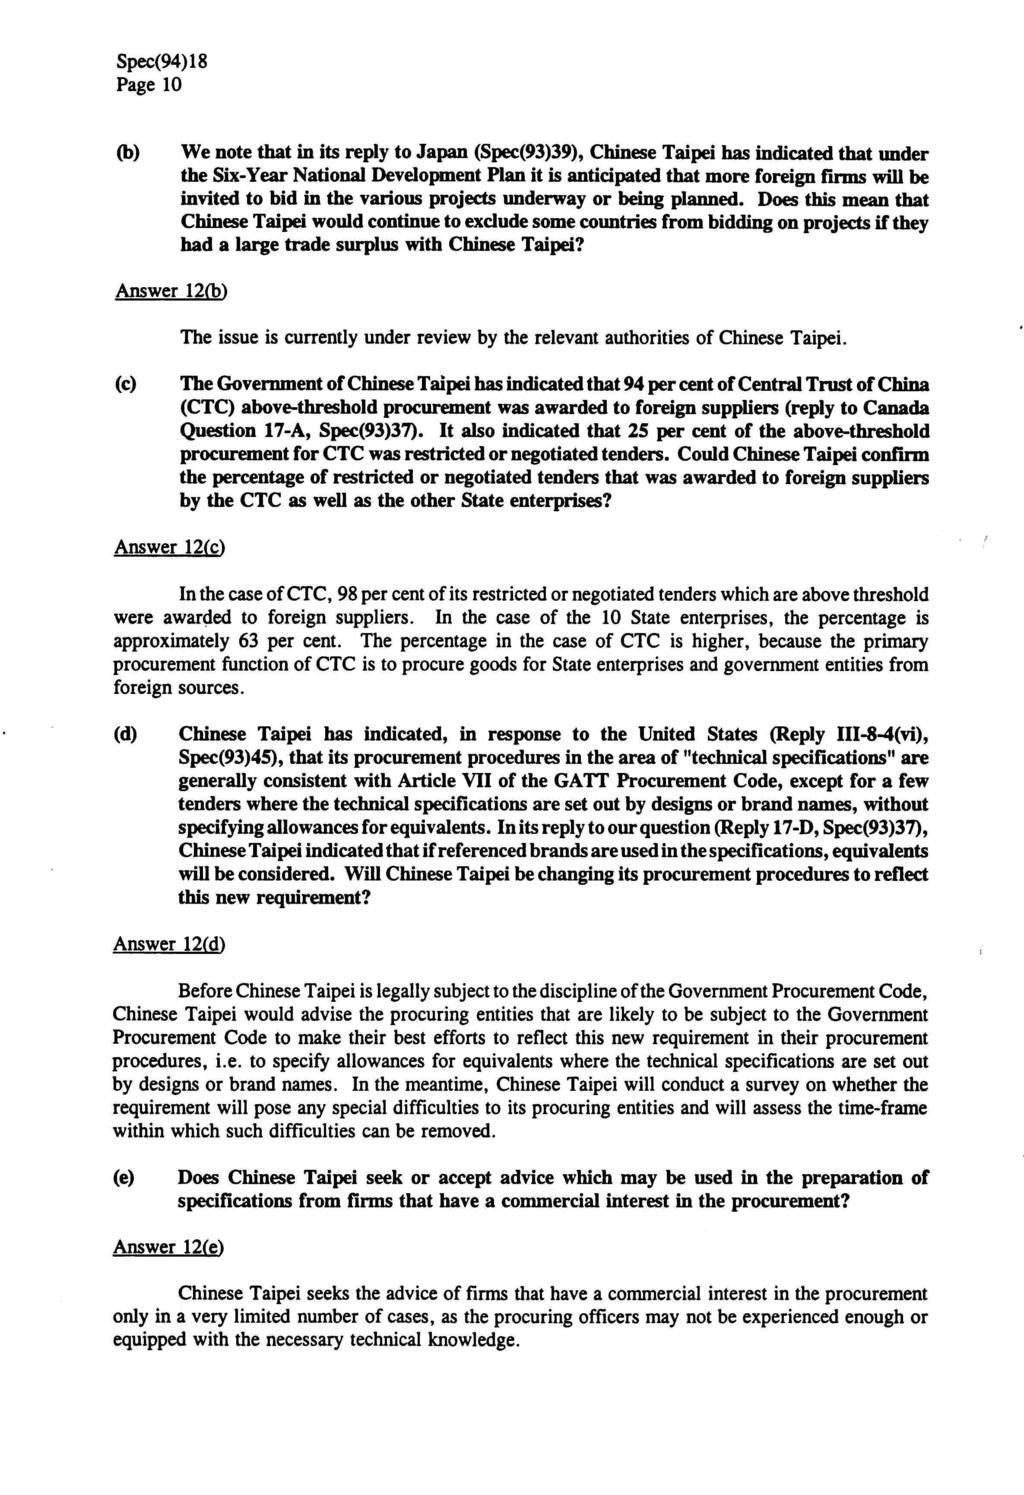 Page 10 (b) We note that in its reply to Japan (Spec(93)39), Chinese Taipei has indicated that under the Six-Year National Development Plan it is anticipated that more foreign firms will be invited